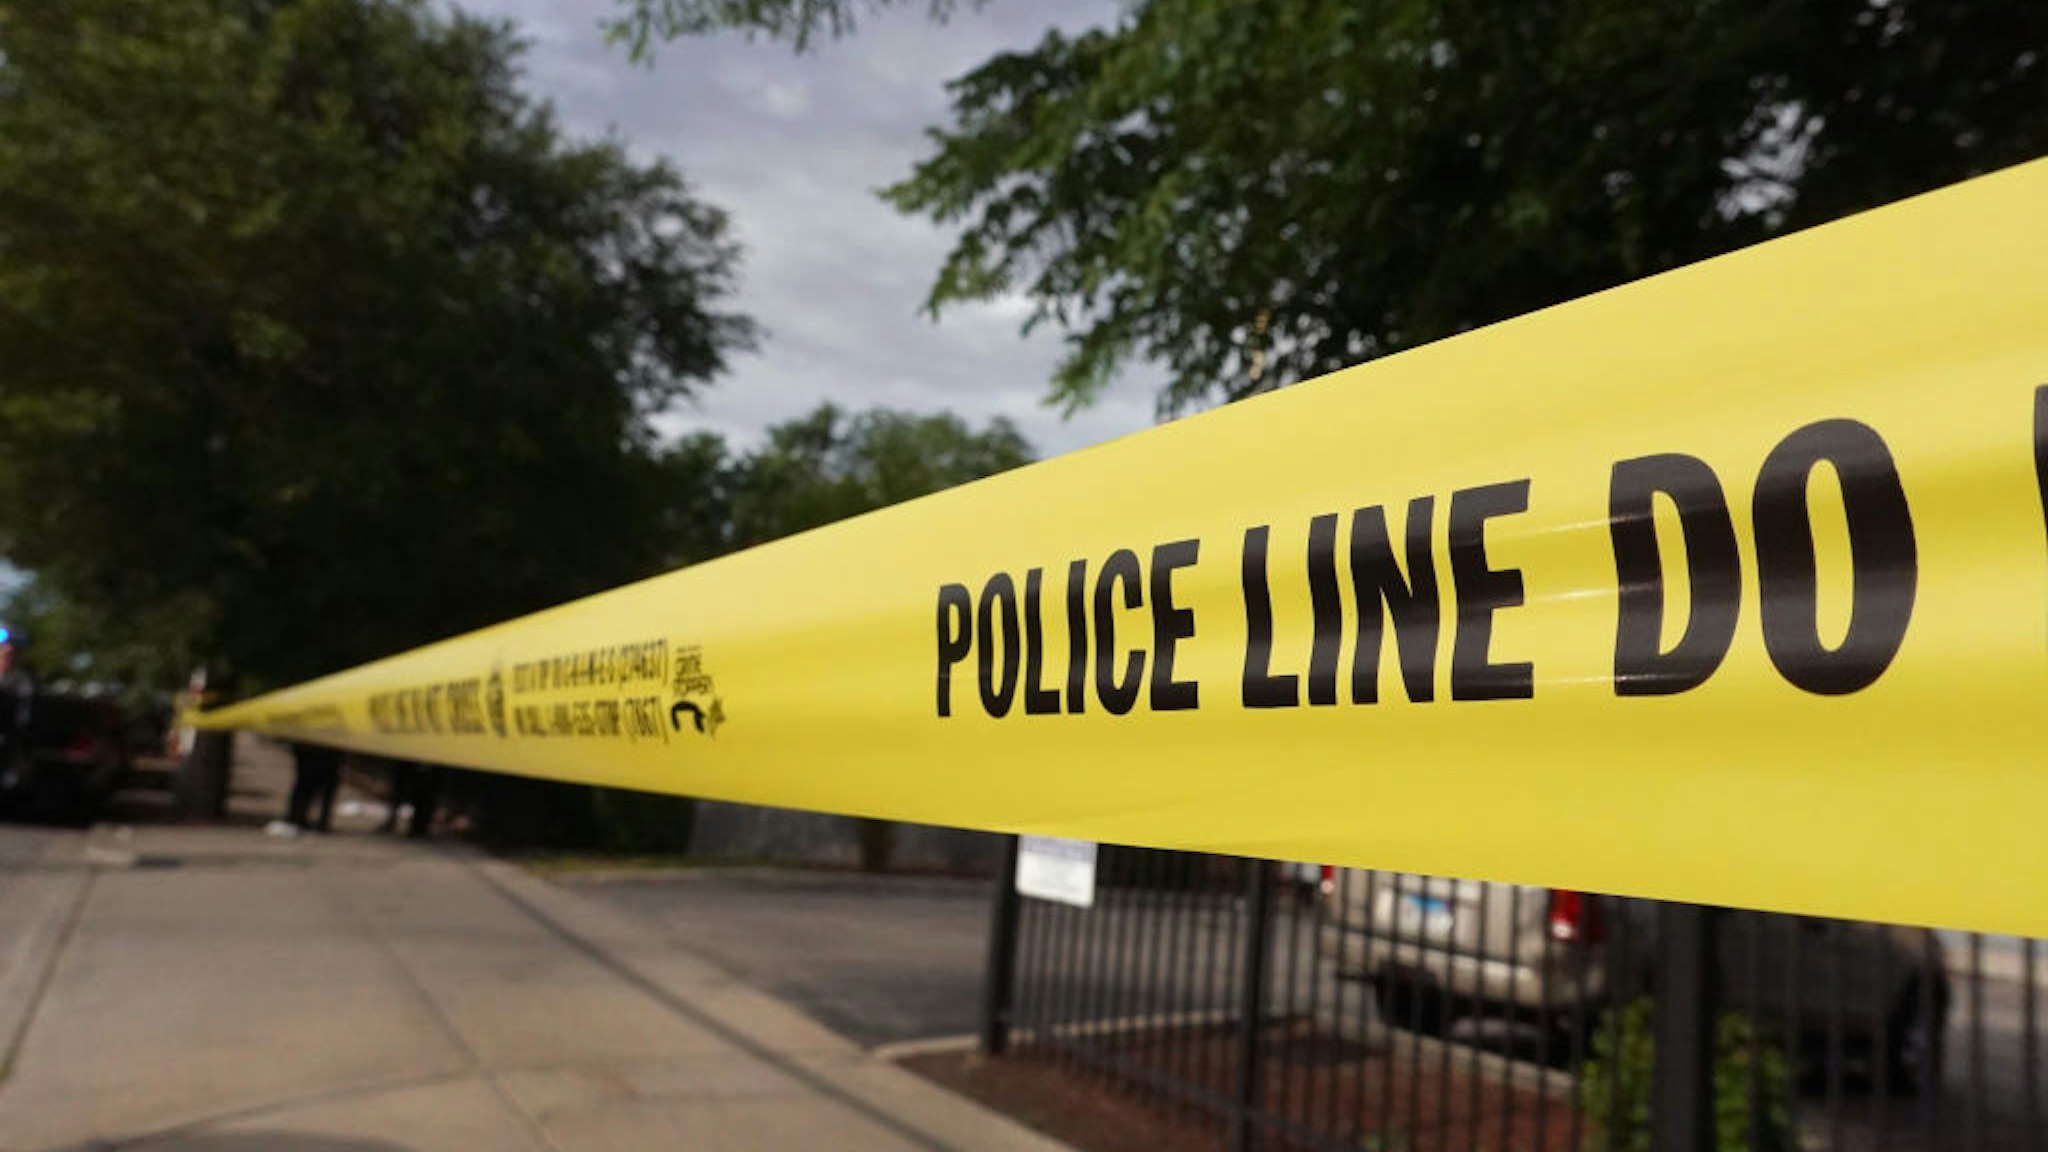 CHICAGO, ILLINOIS - JUNE 23: Police tape surrounds a crime scene where three people were shot at the Wentworth Gardens housing complex in the Bridgeport neighborhood on June 23, 2021 in Chicago, Illinois. A 24-year-old man died from injuries he suffered in the shooting and two others, a 22-year-old male and a 25-year-old male, were seriously wounded. (Photo by Scott Olson/Getty Images)